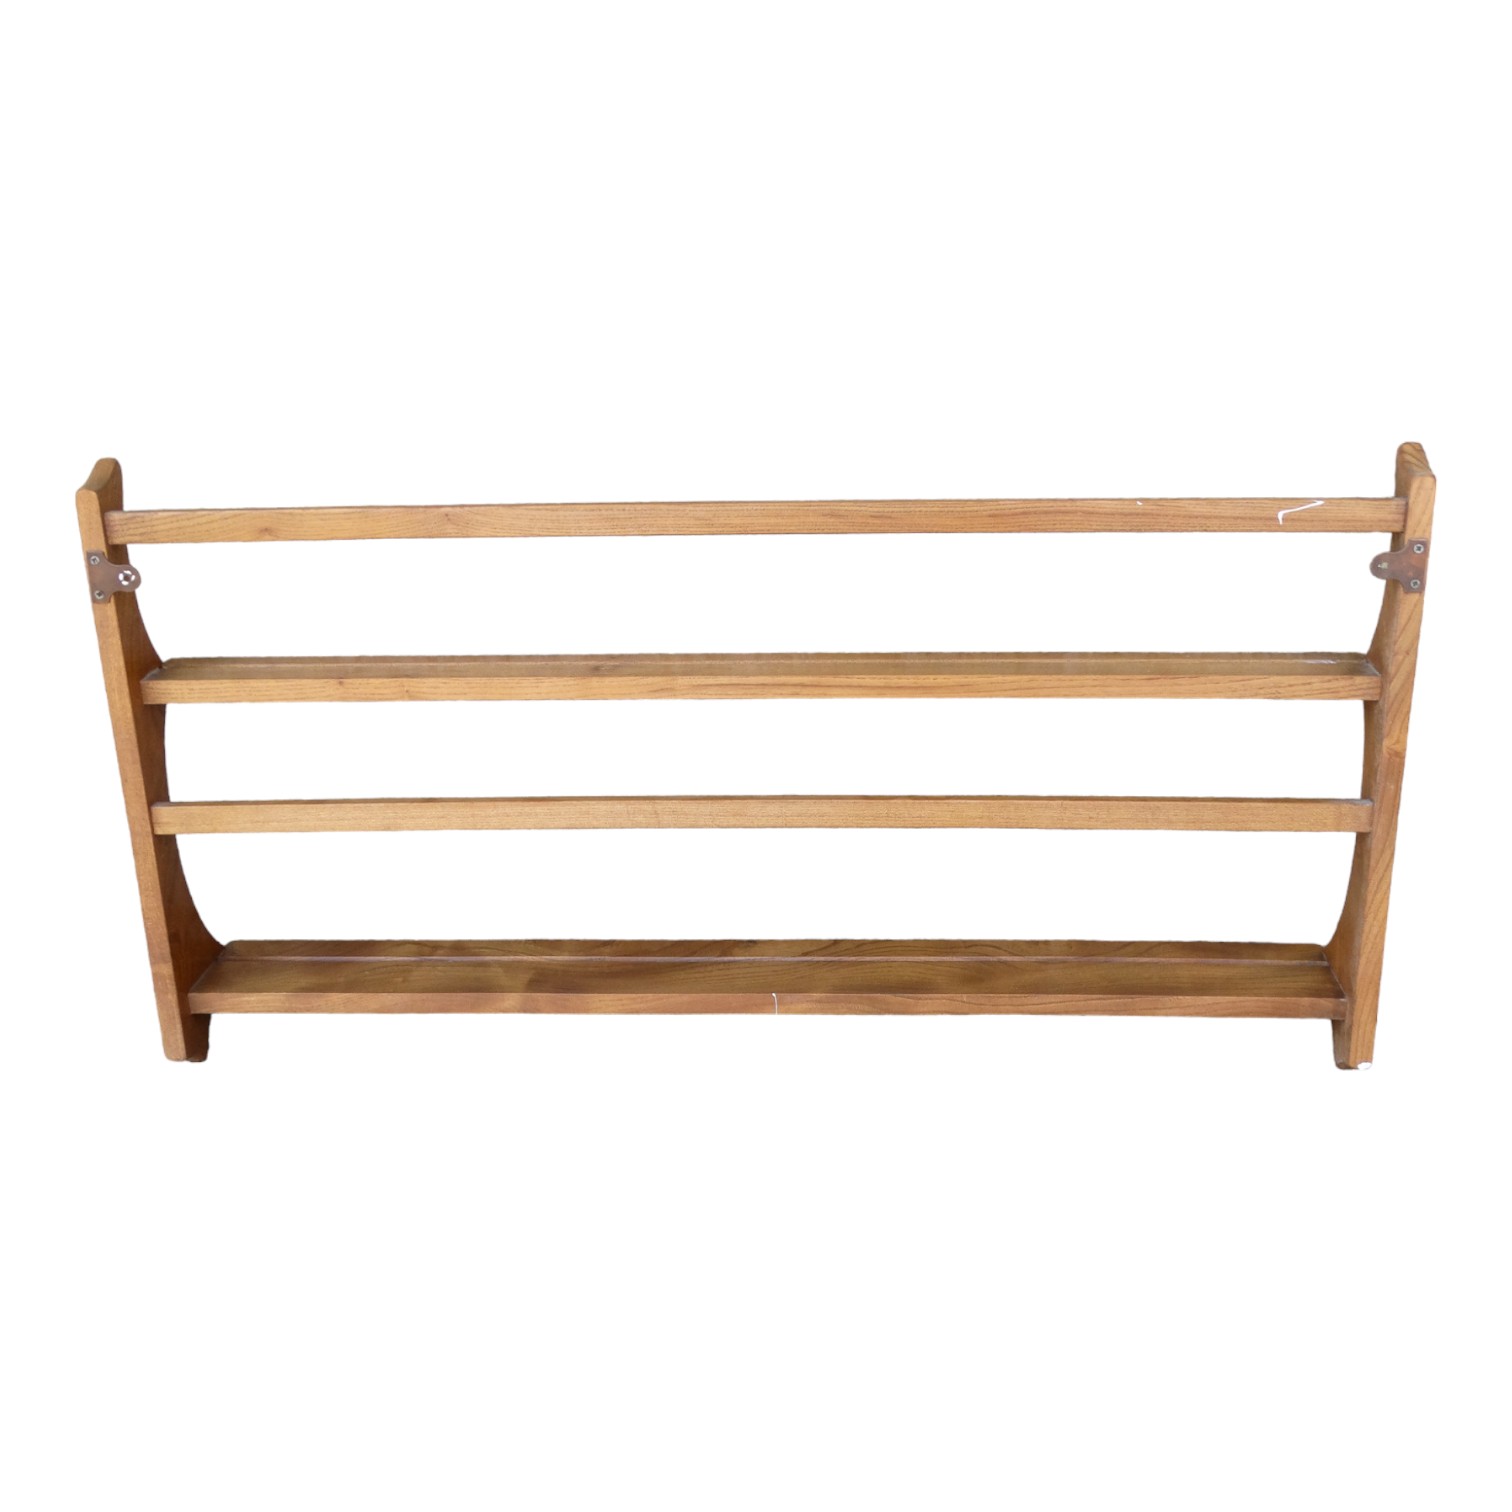 An Ercol hanging plate rack - Golden Dawn, model 268, the rack having two graduating shelves with - Image 4 of 4